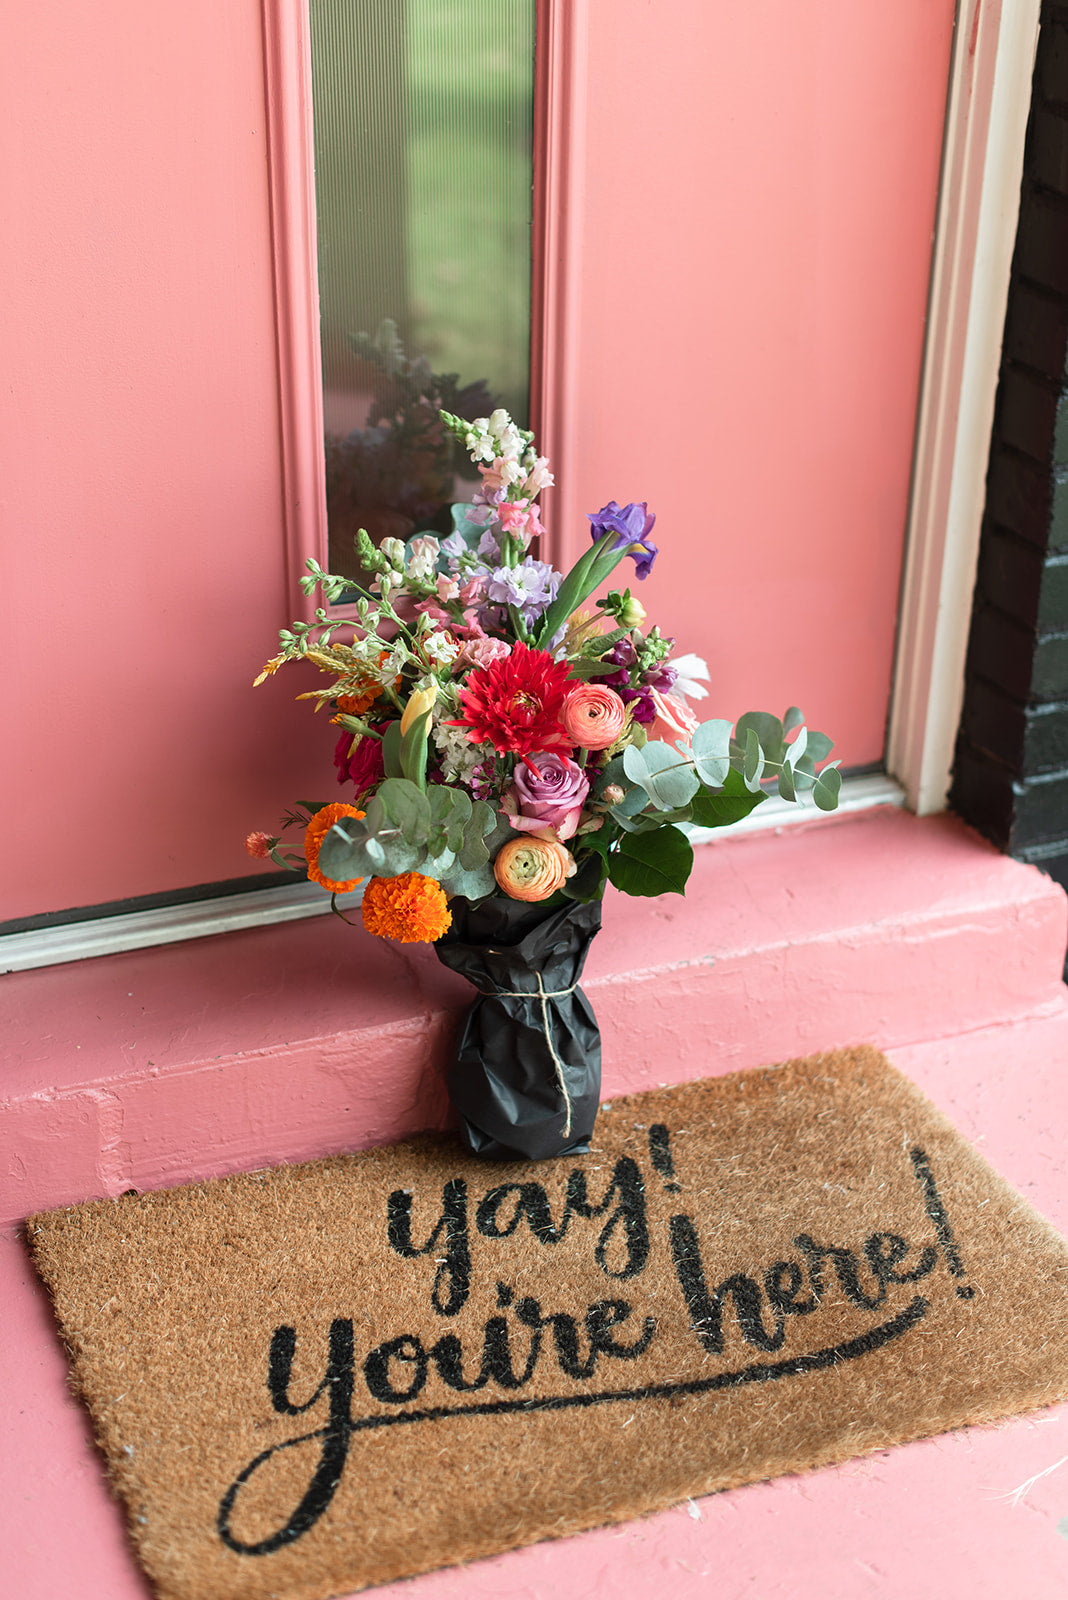 Blue Iris, red dahlia, peach ranunculus in a paper wrapped vase, as captured in the studio of a Memphis, TN-based boutique floral design studio. The perfect choice for a romantic and timeless wedding